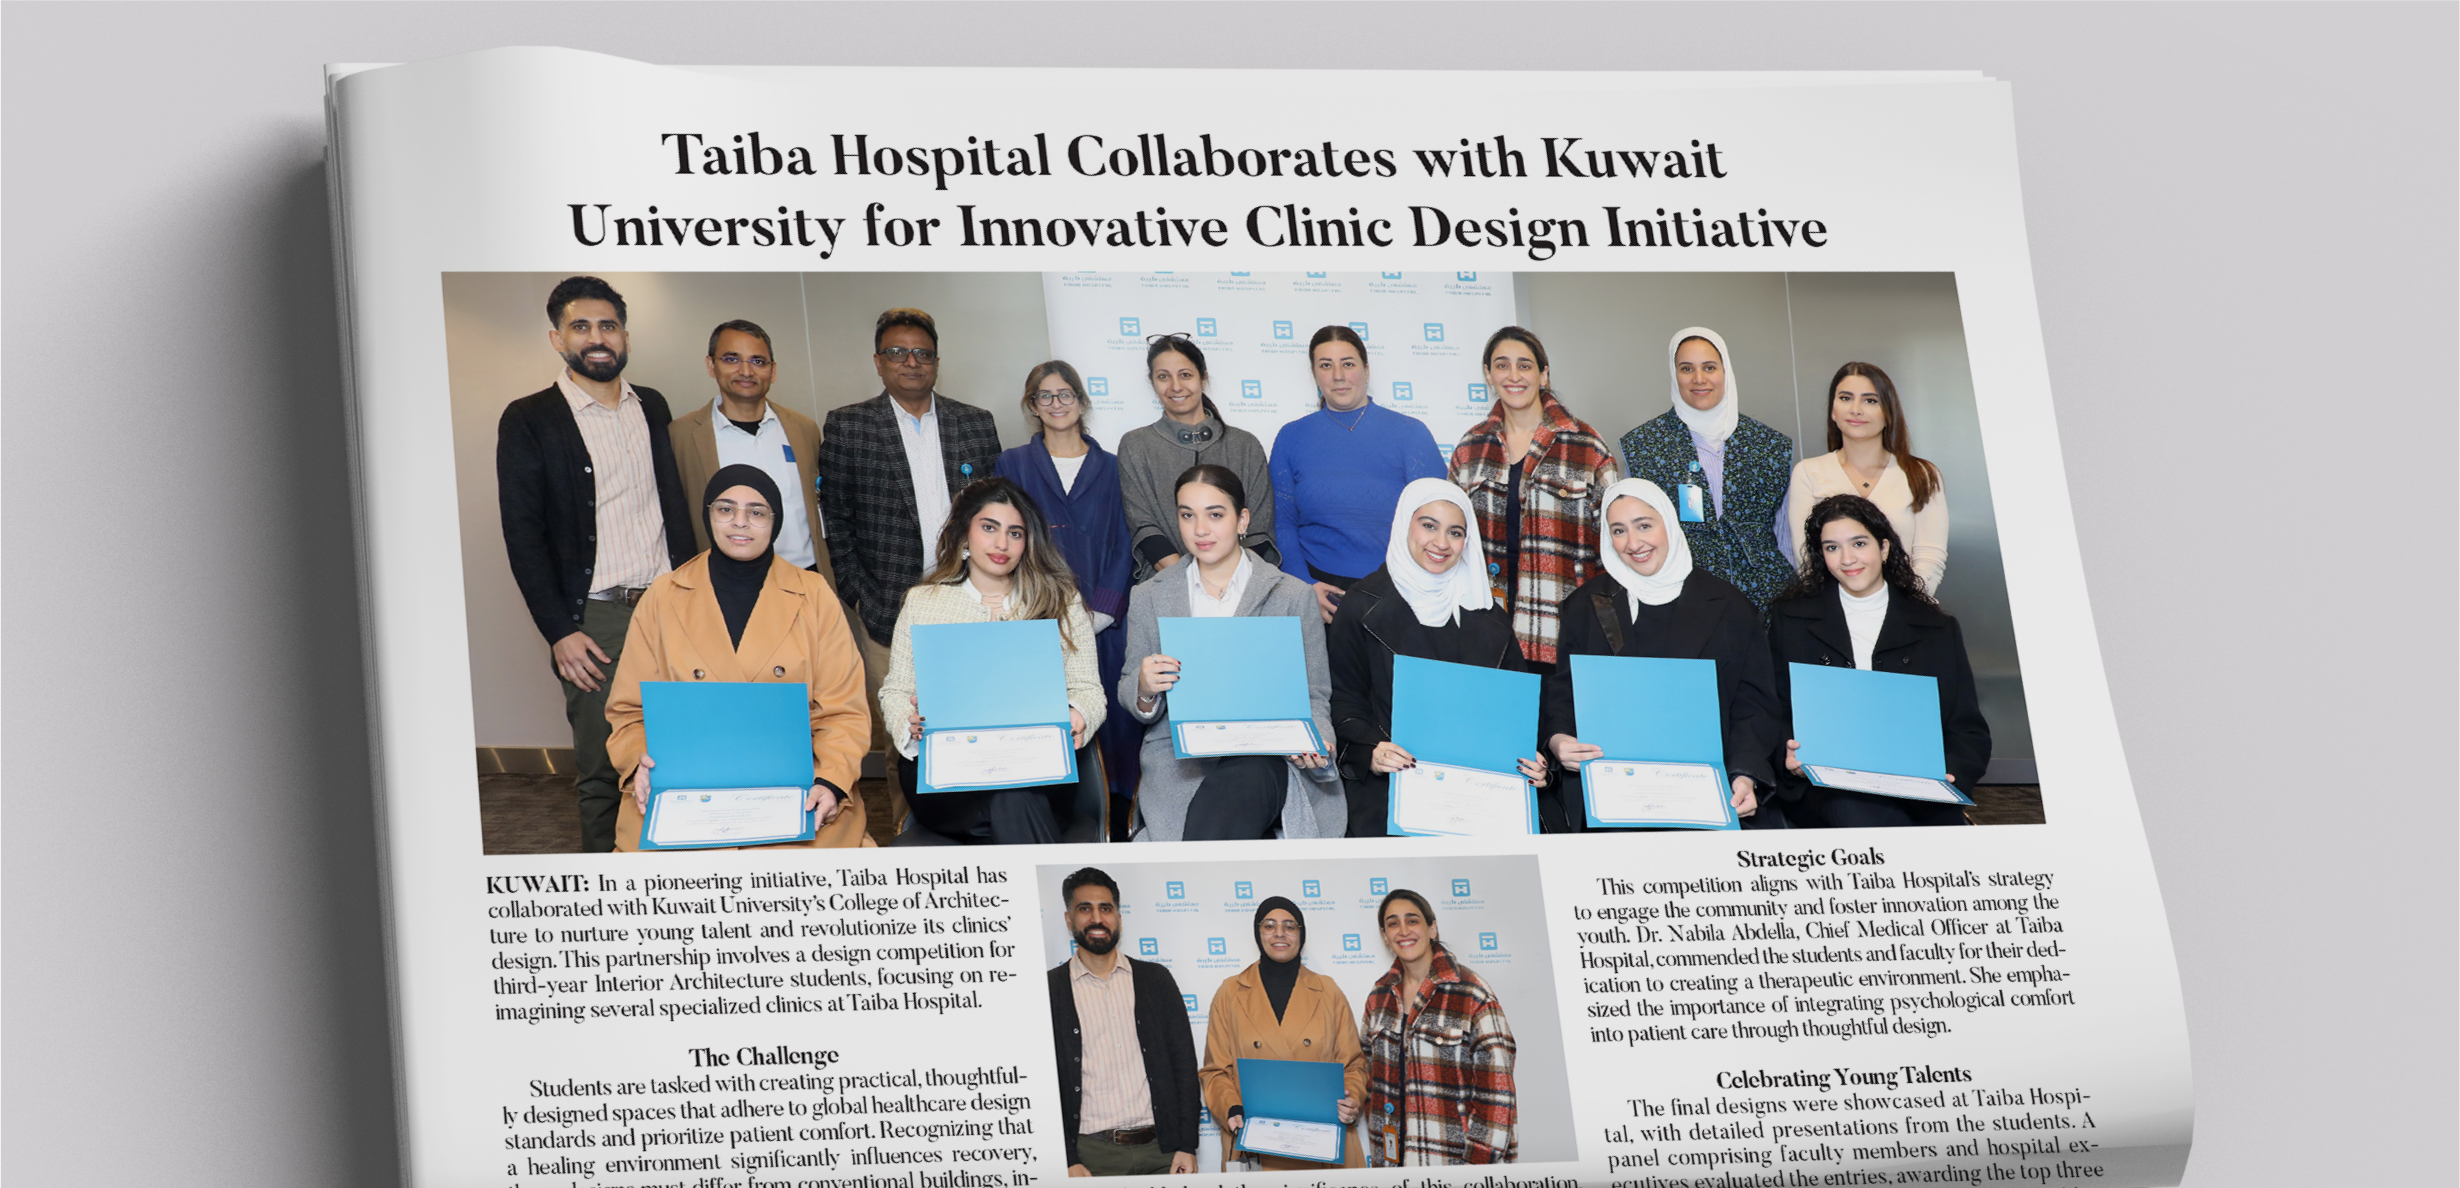 Taiba Hospital Collaborates with Kuwait University for Innovative Clinic Design Initiative